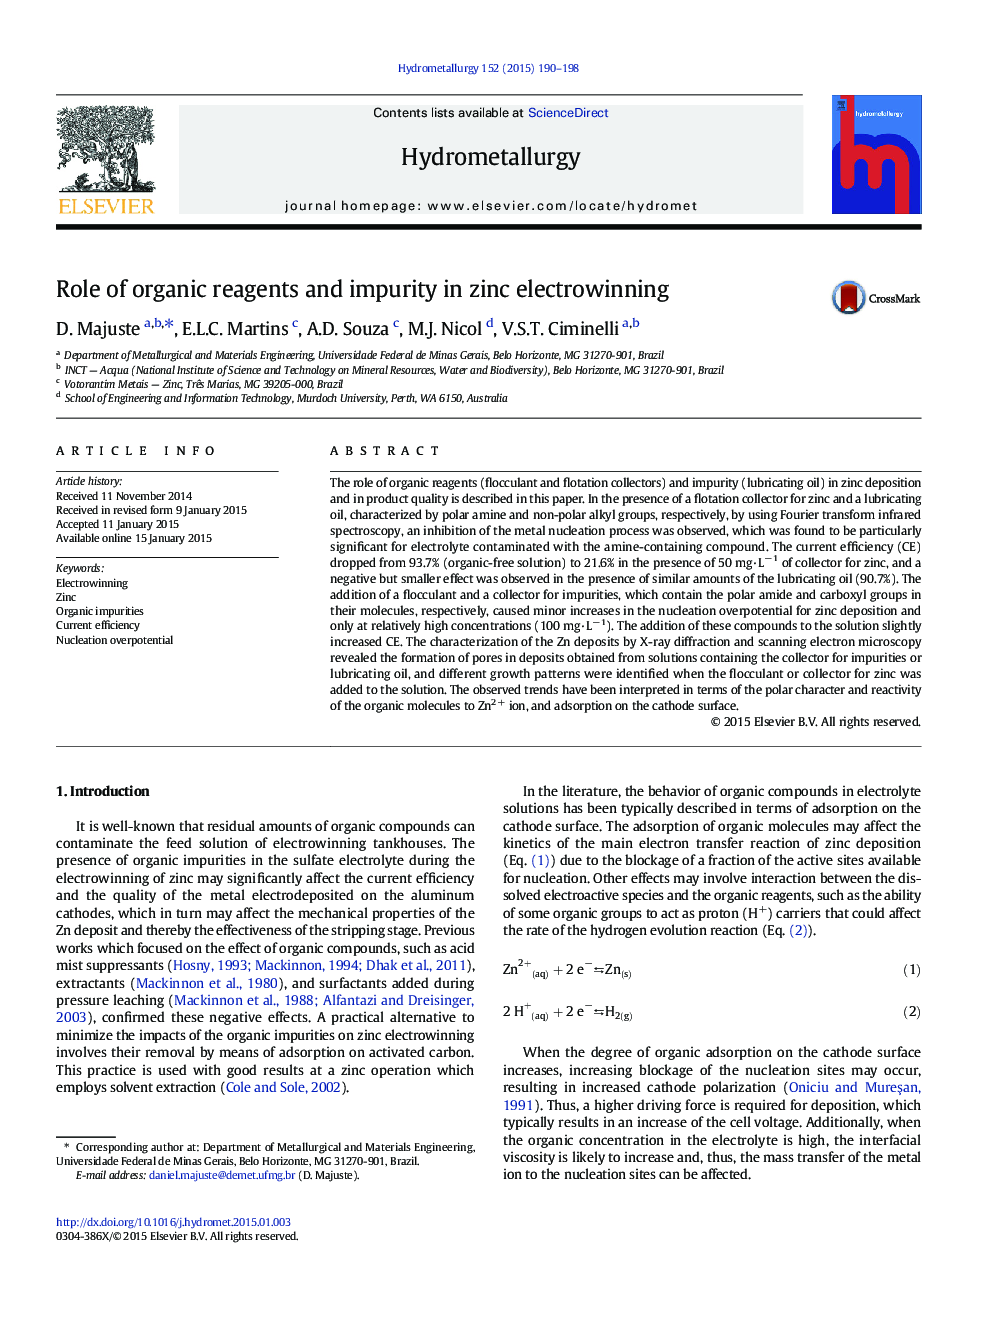 Role of organic reagents and impurity in zinc electrowinning